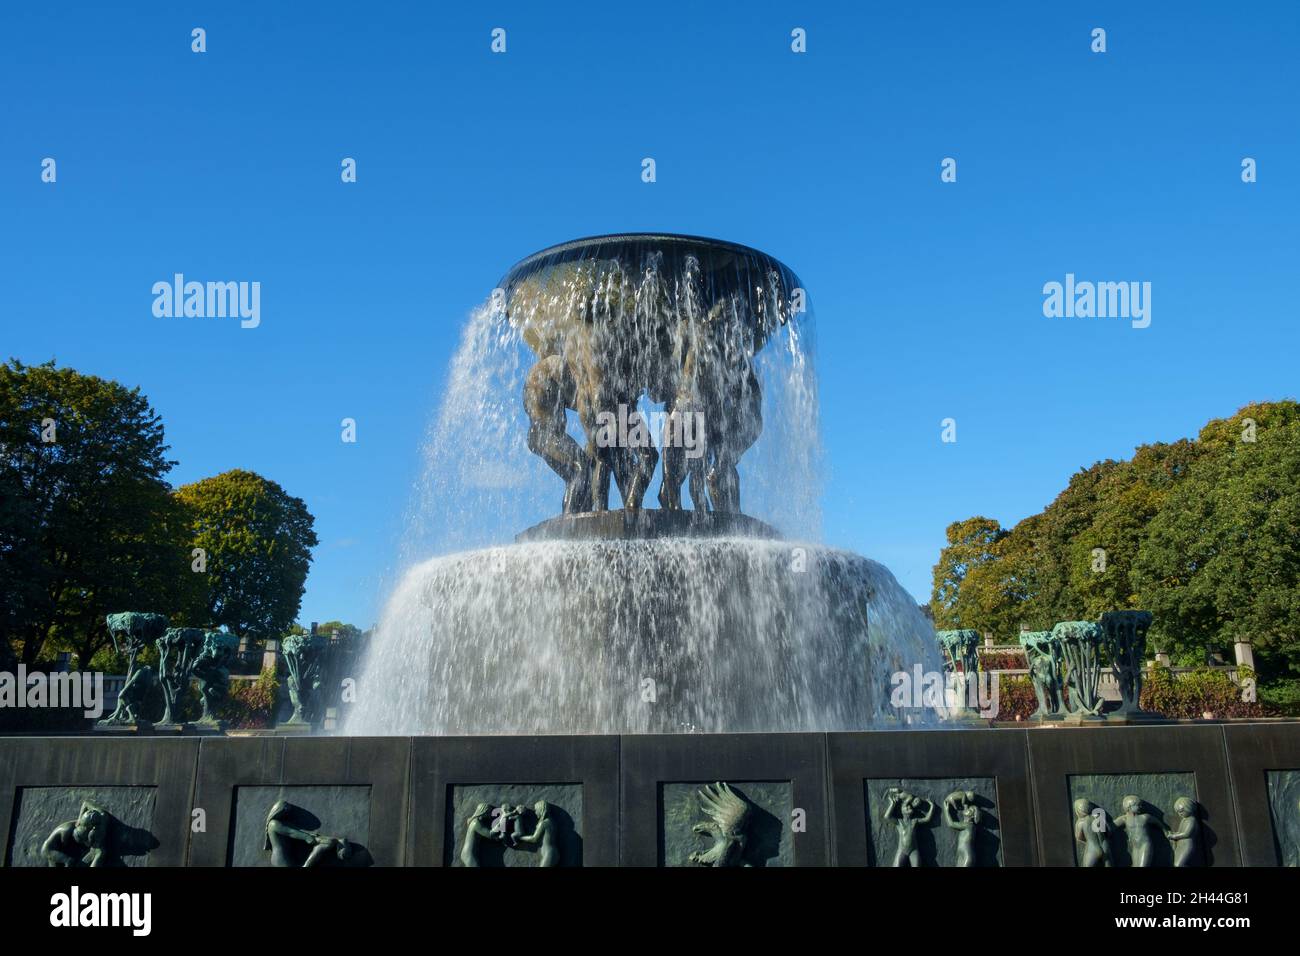 Oslo, Norway - October 7th 2016: Vigeland Sculpture Park. Fountain featuring six bronze men holding a bowl of cascading water on their shoulders. Stock Photo